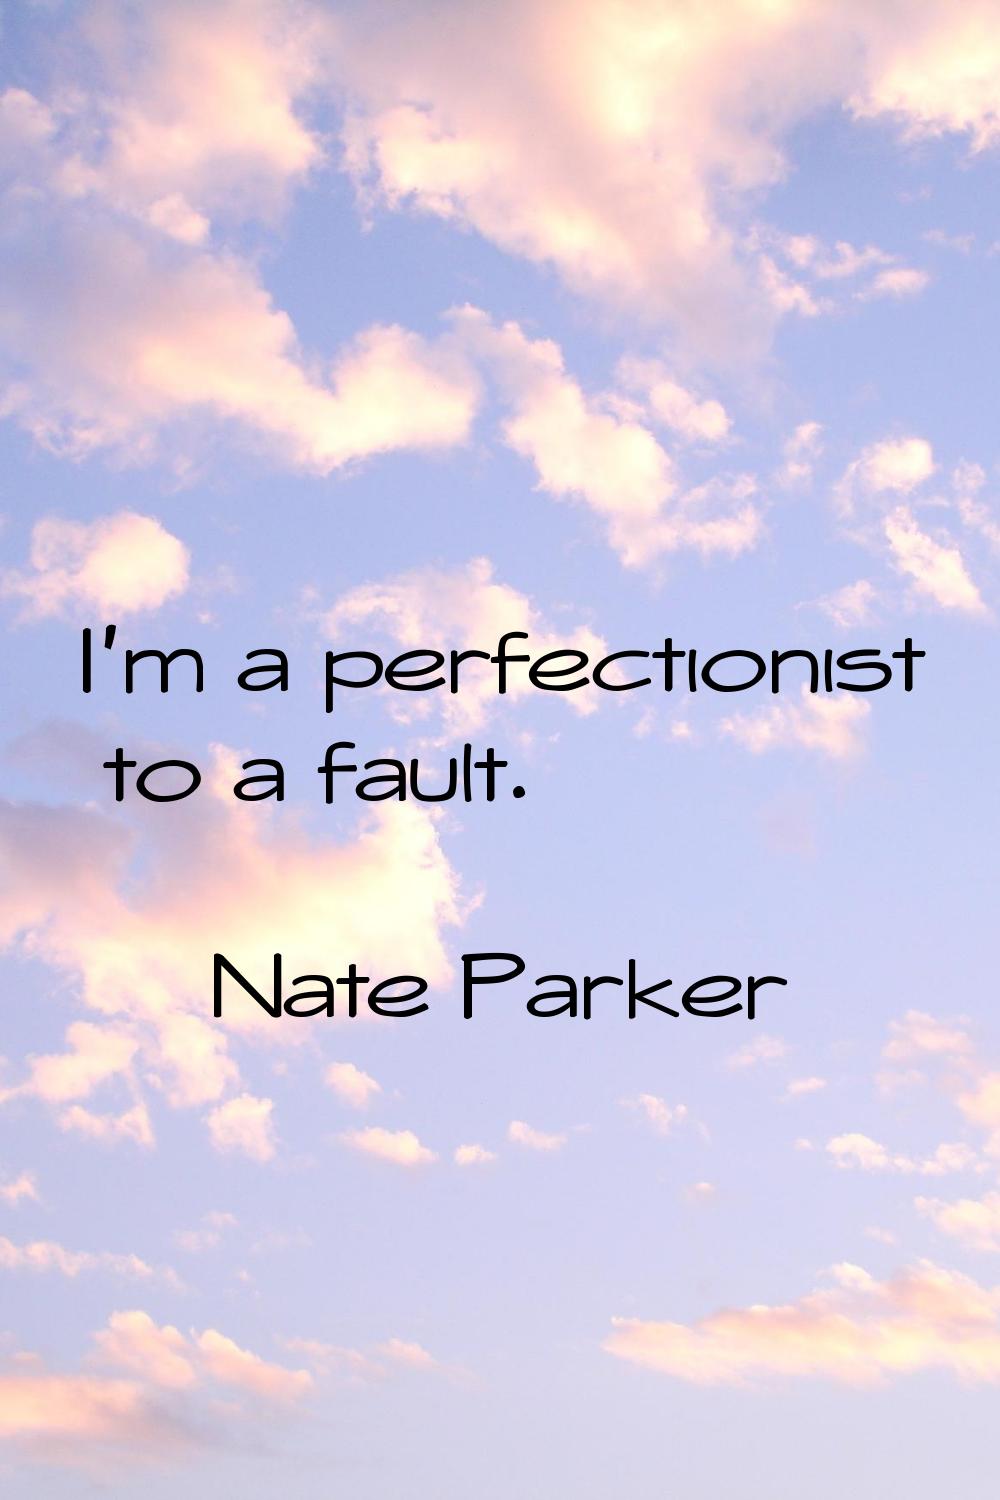 I'm a perfectionist to a fault.